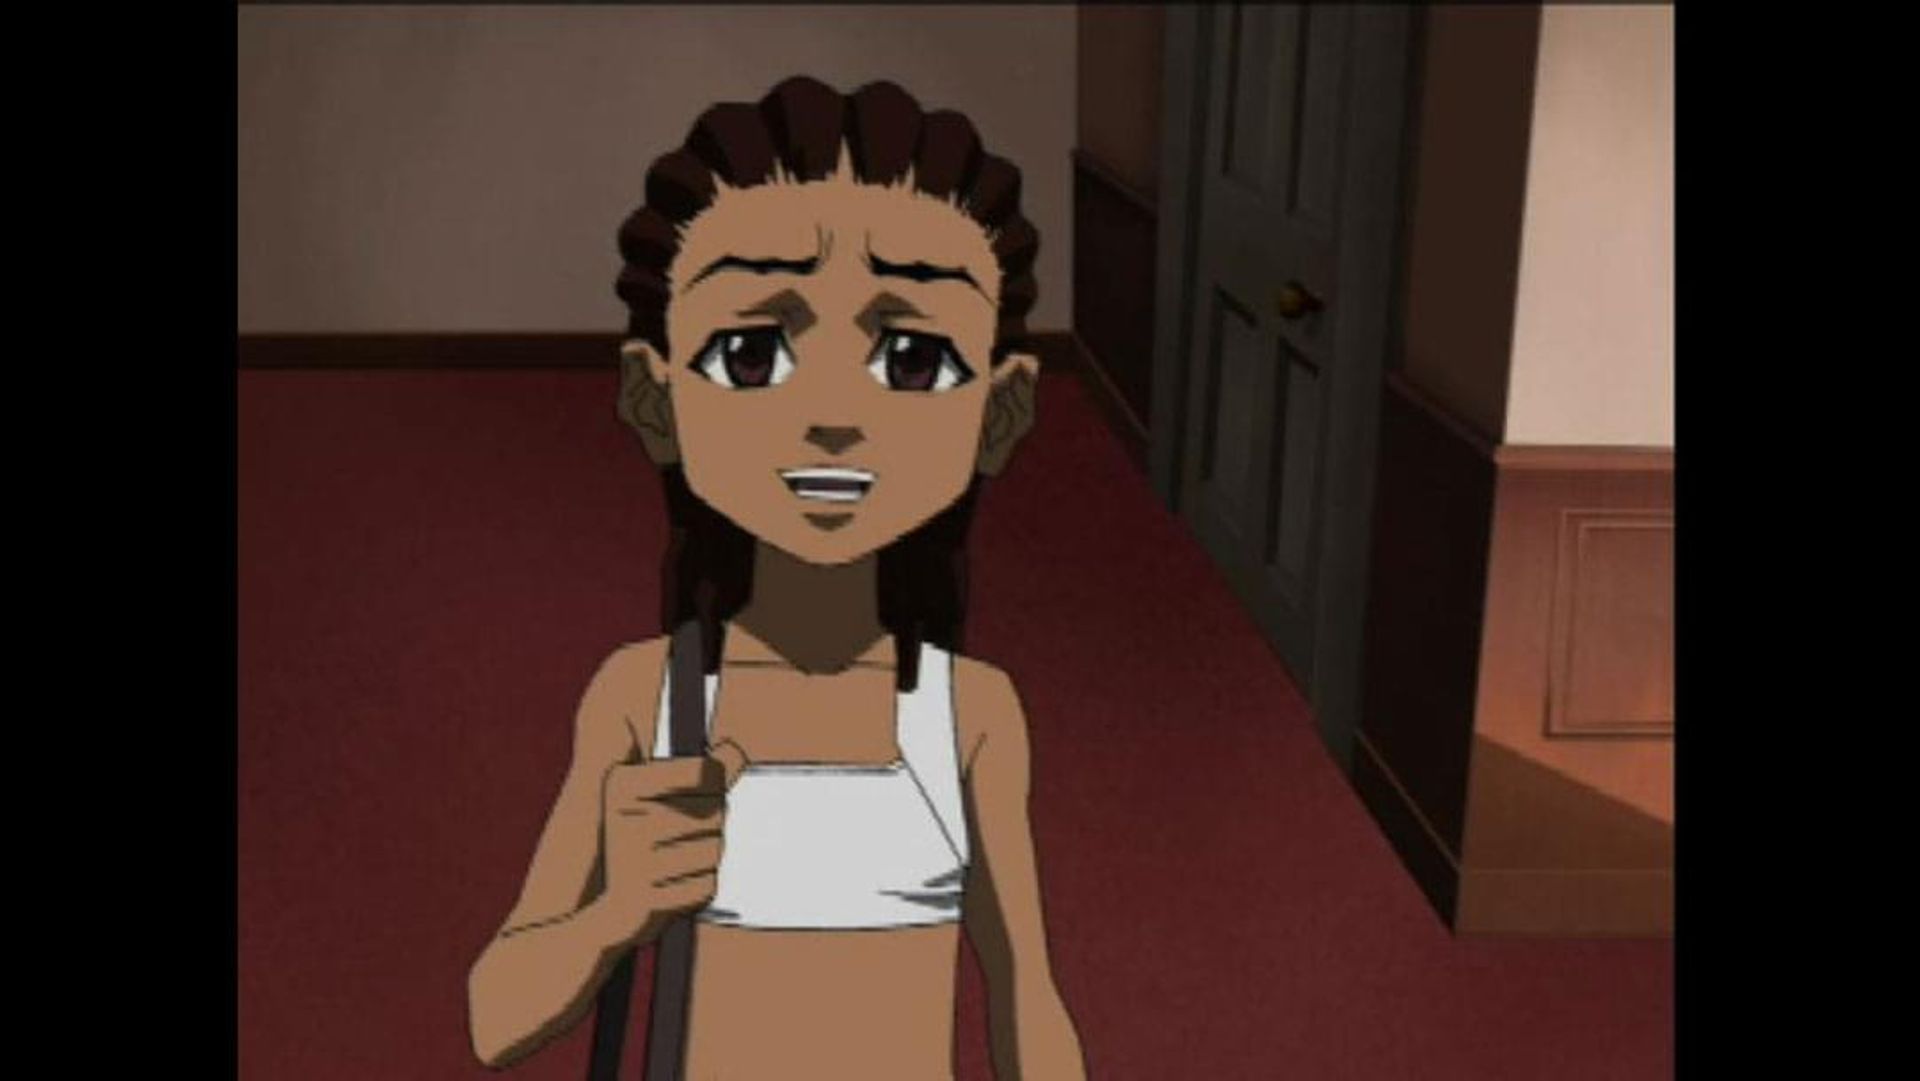 Homies Over Hoes- The Music Video - S2 EP13 - The Boondocks.